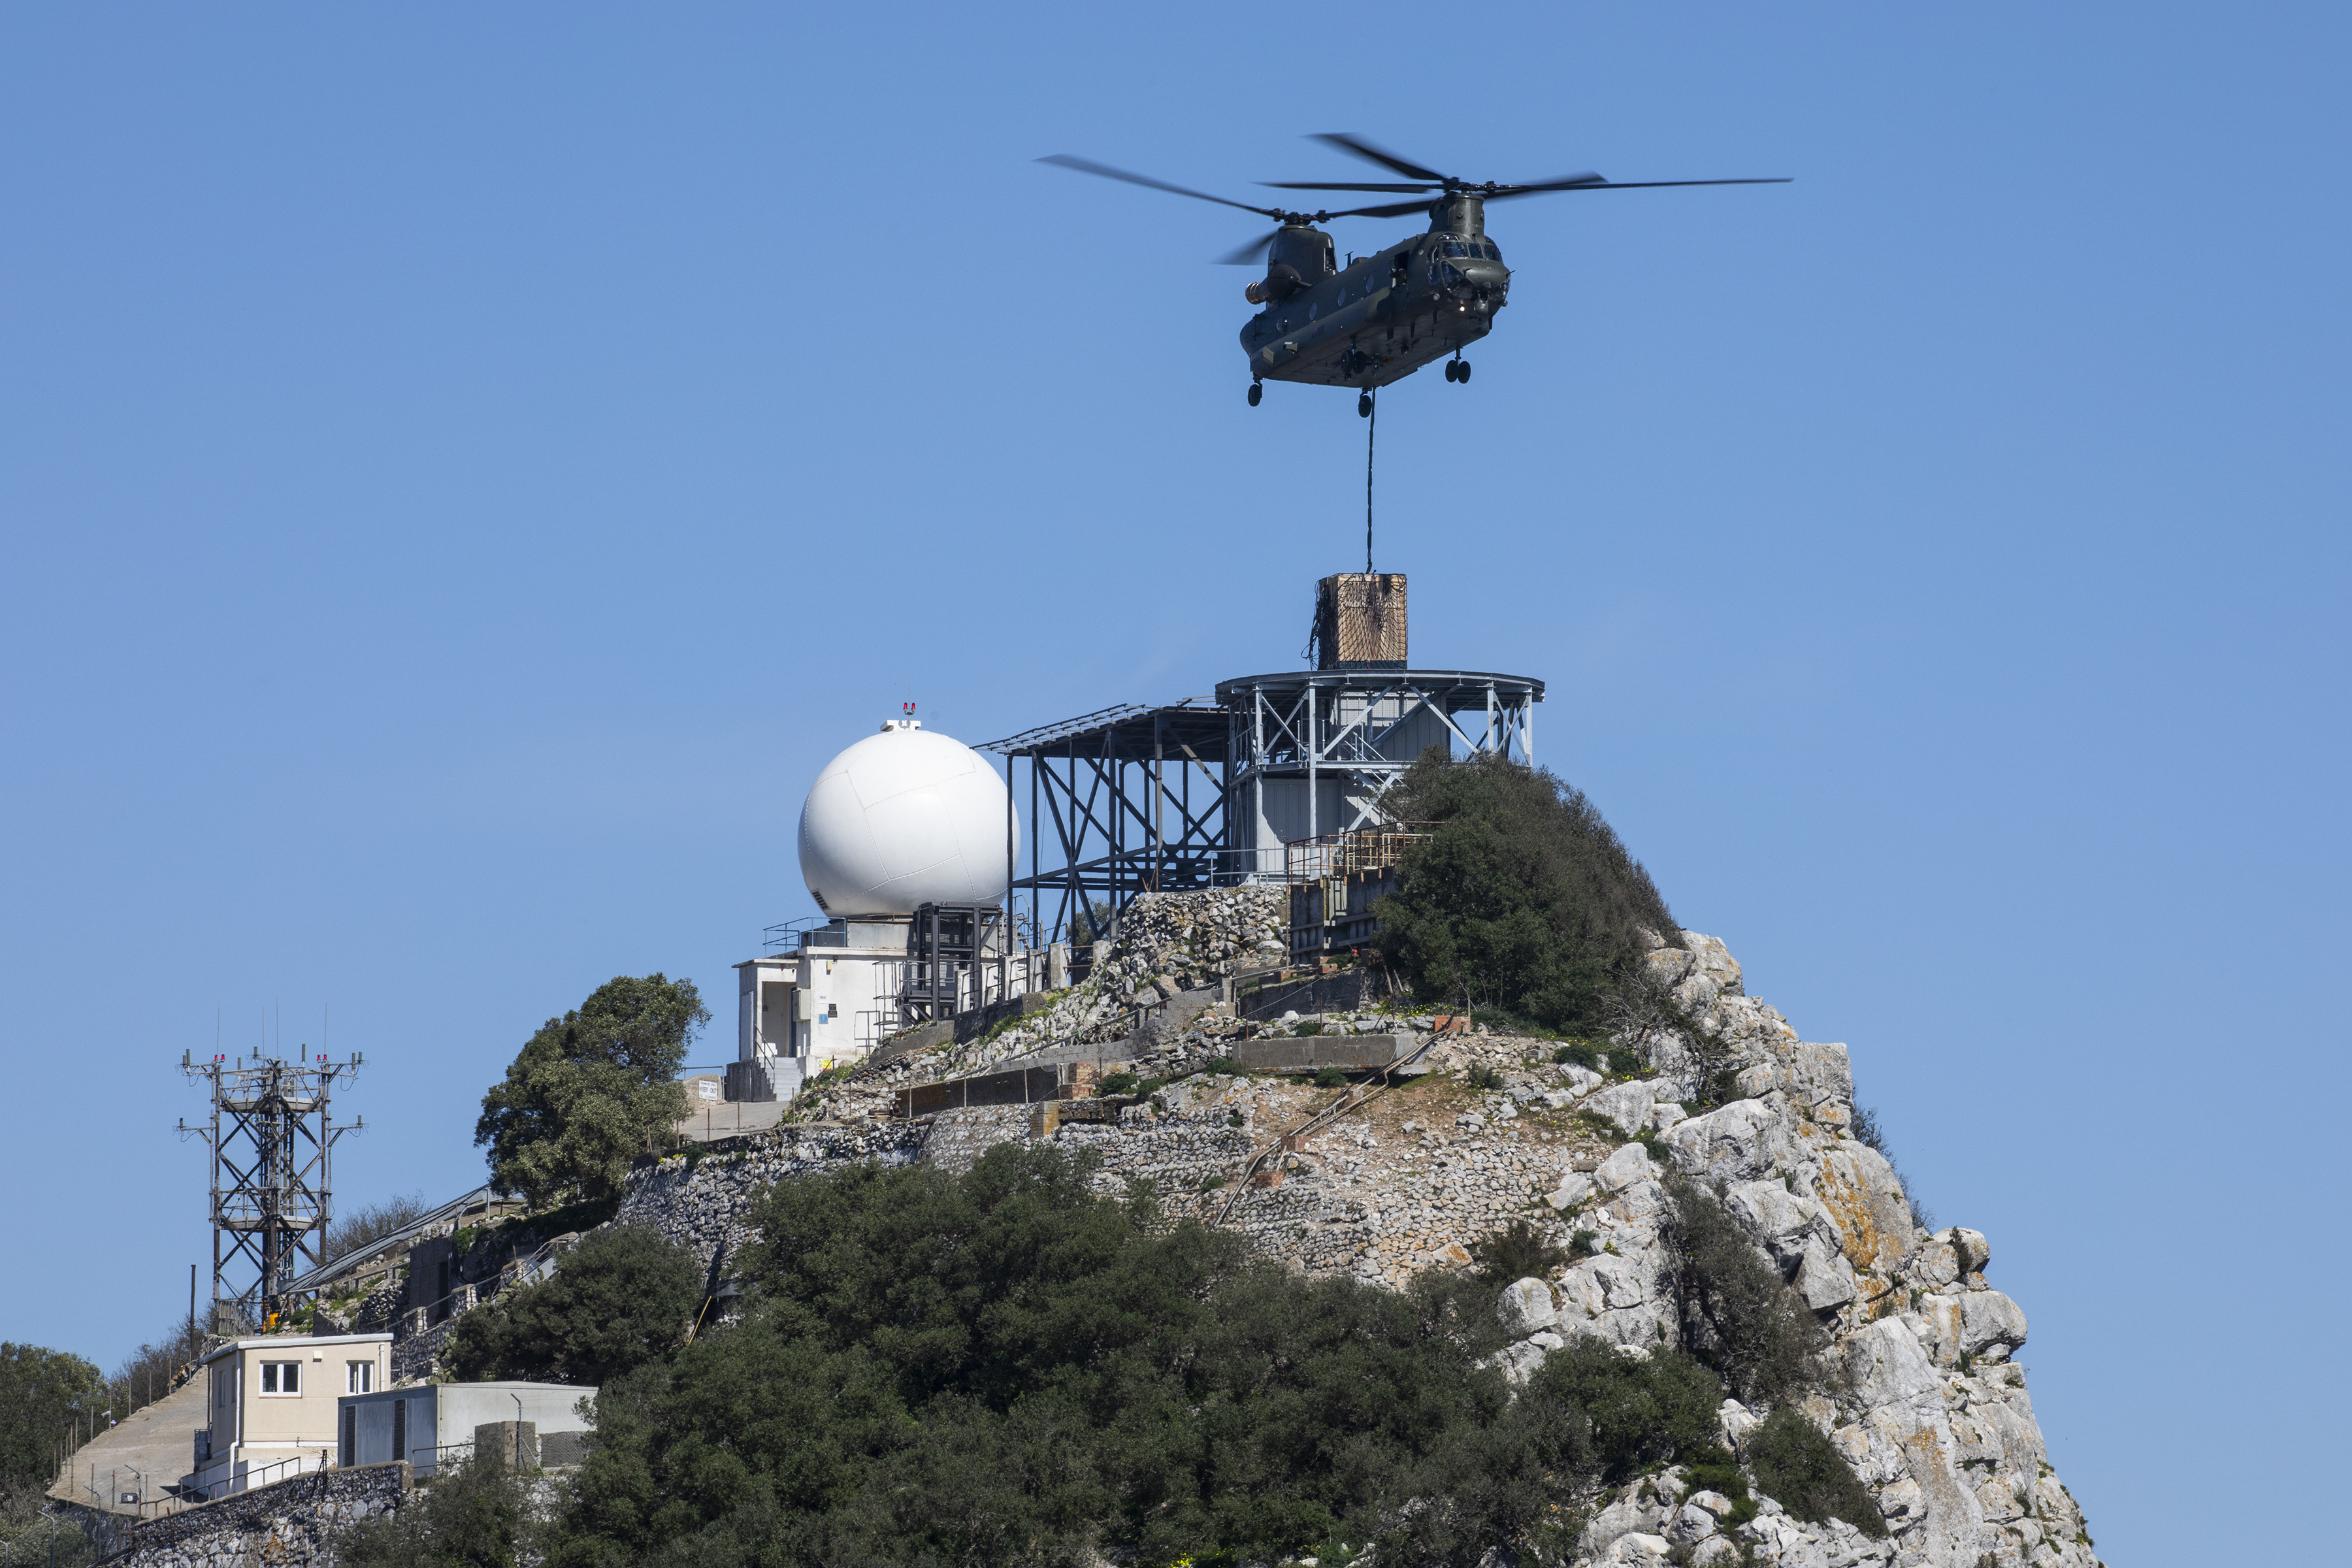 Chinook delivers cargo to the Rock of Gibraltar